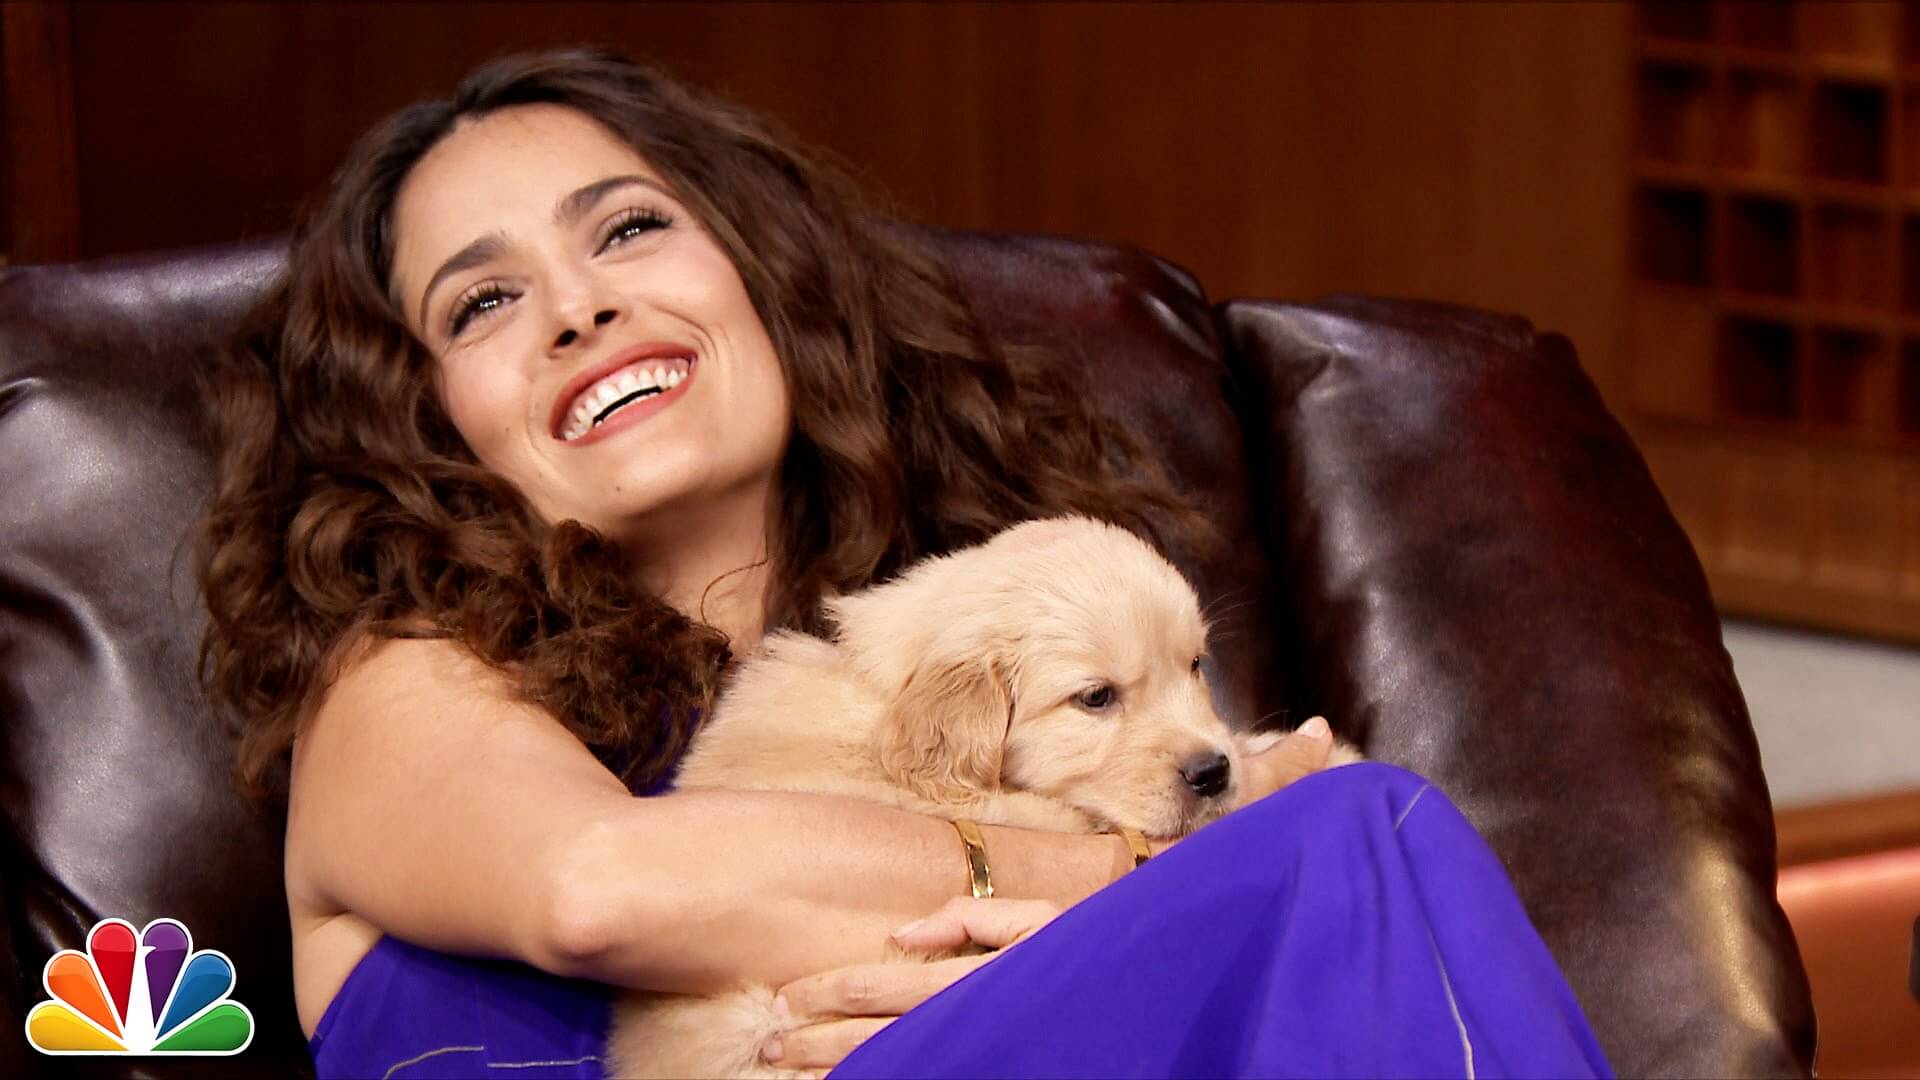 Salma Hayek With Adorable Puppies On The Tonight Show